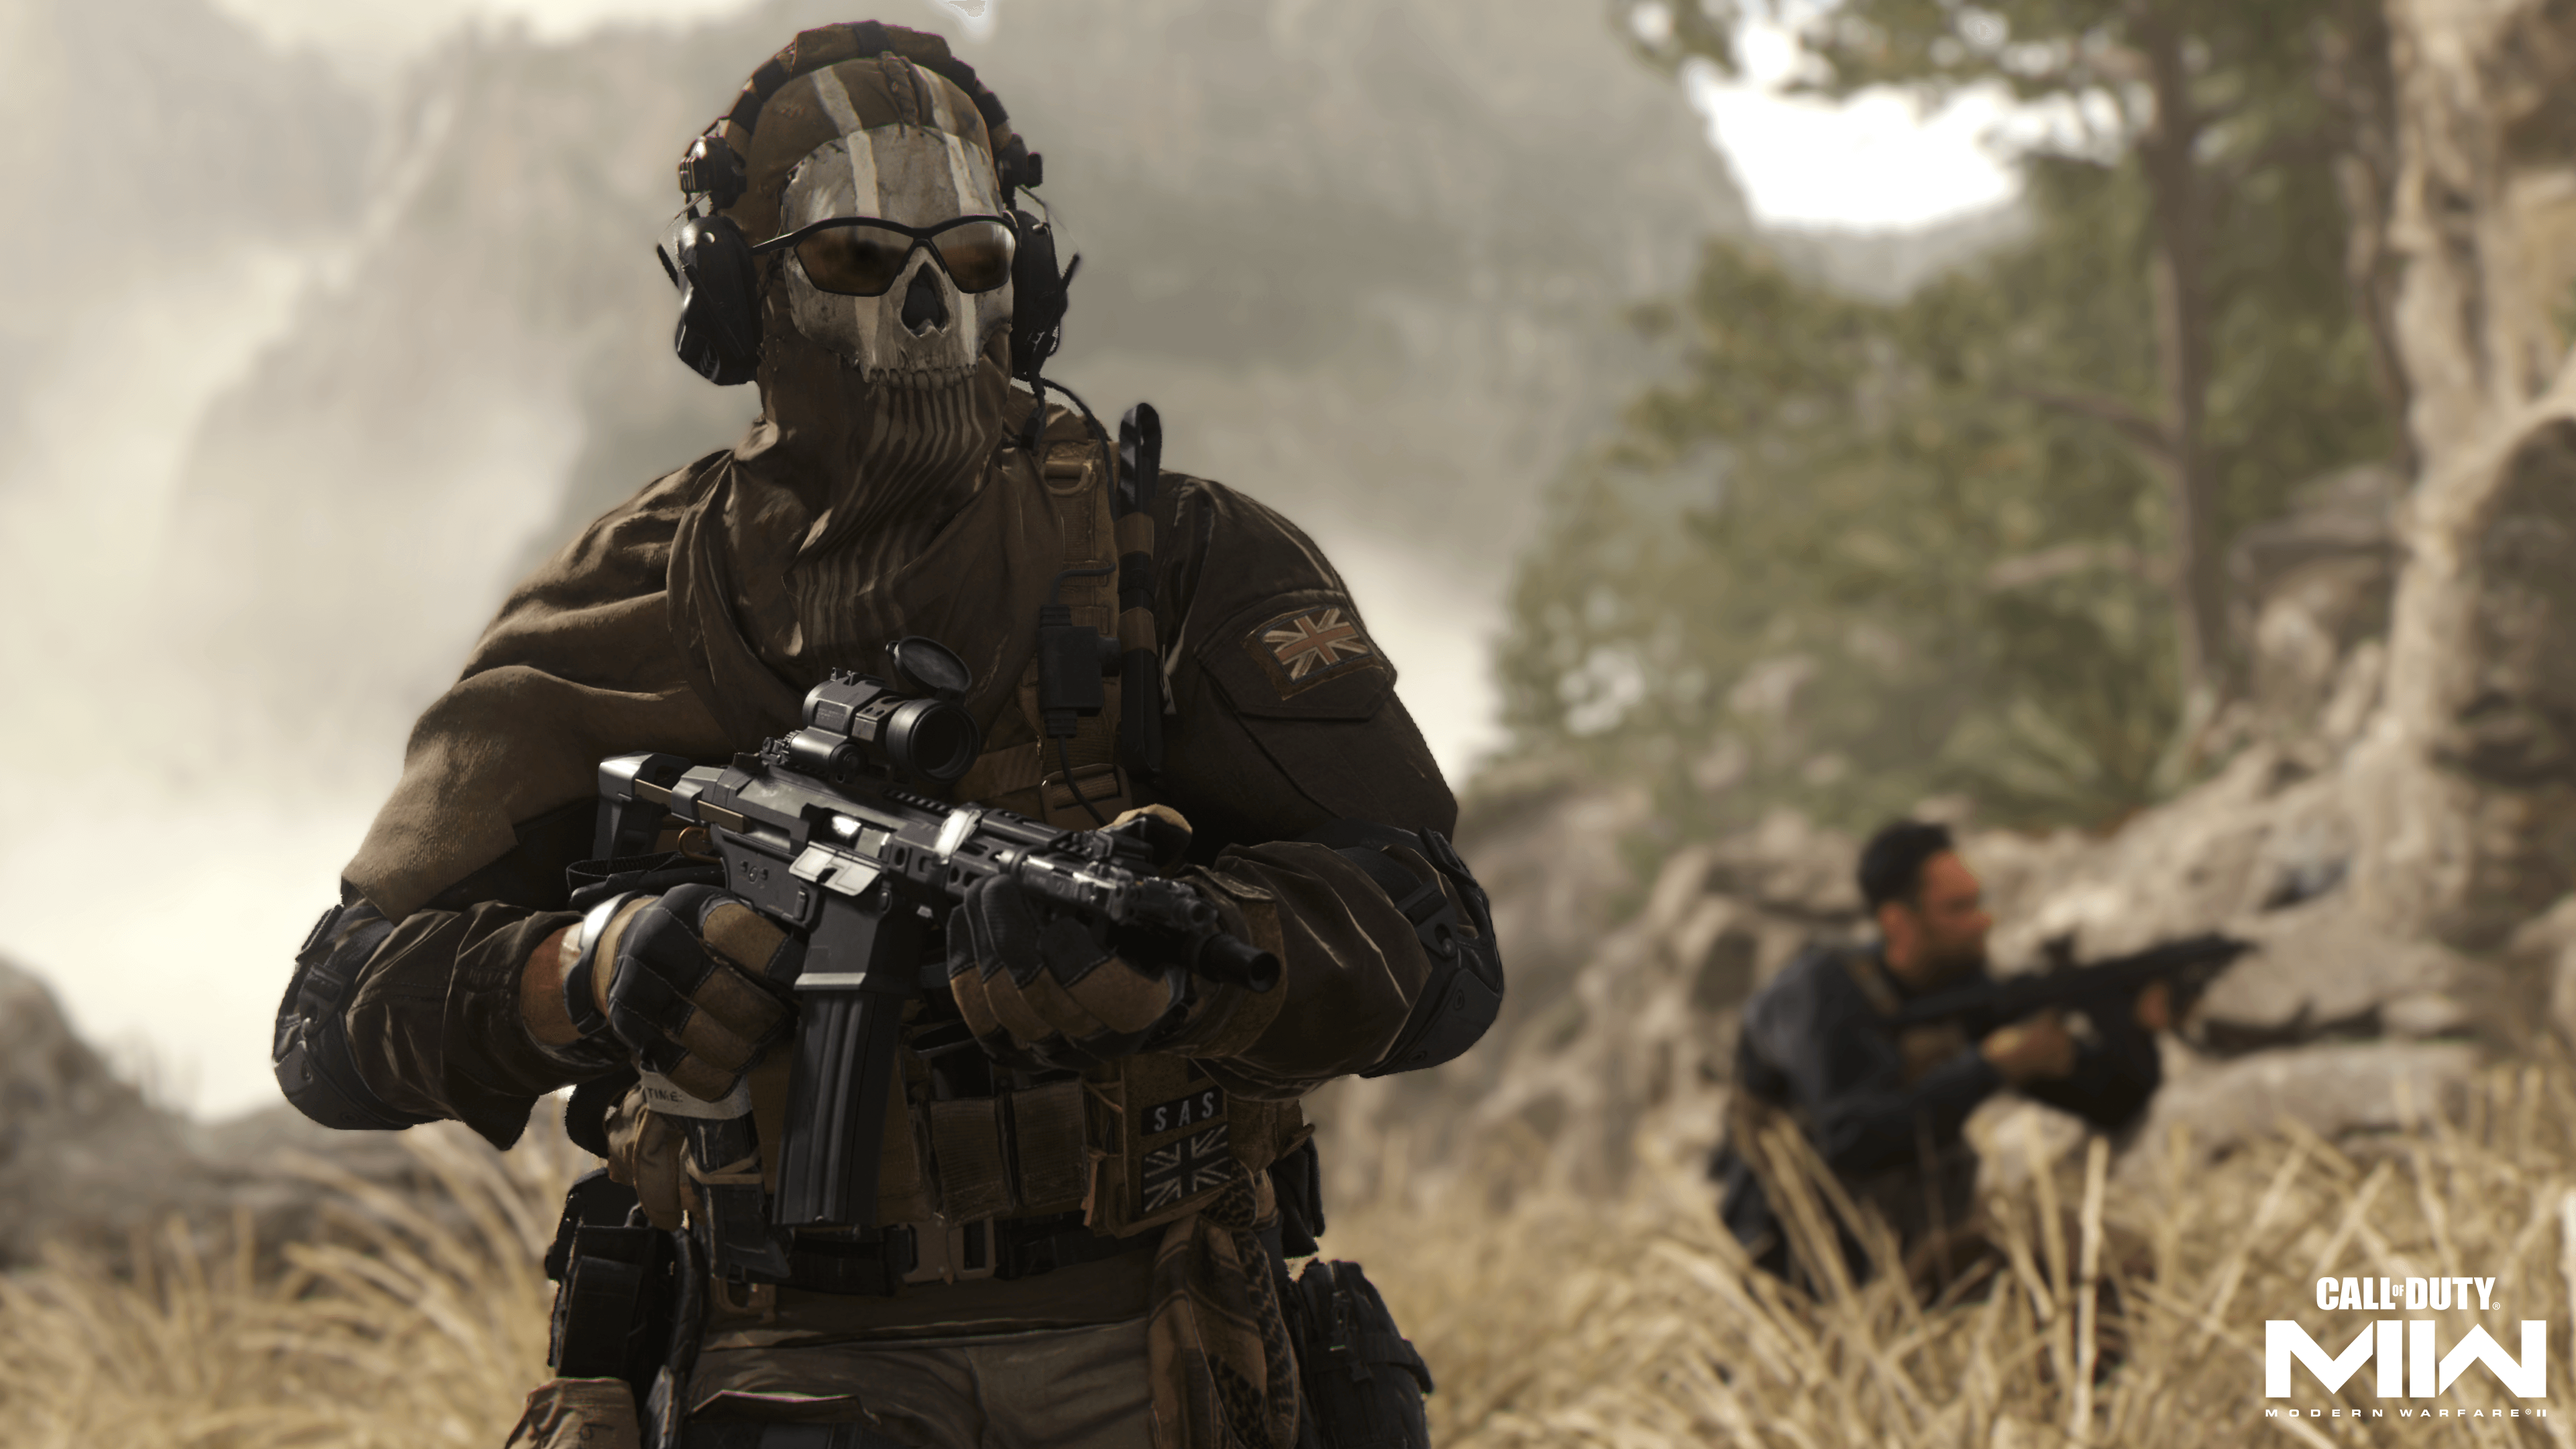 Call of Duty Coming To Nintendo After 9-Year Absence